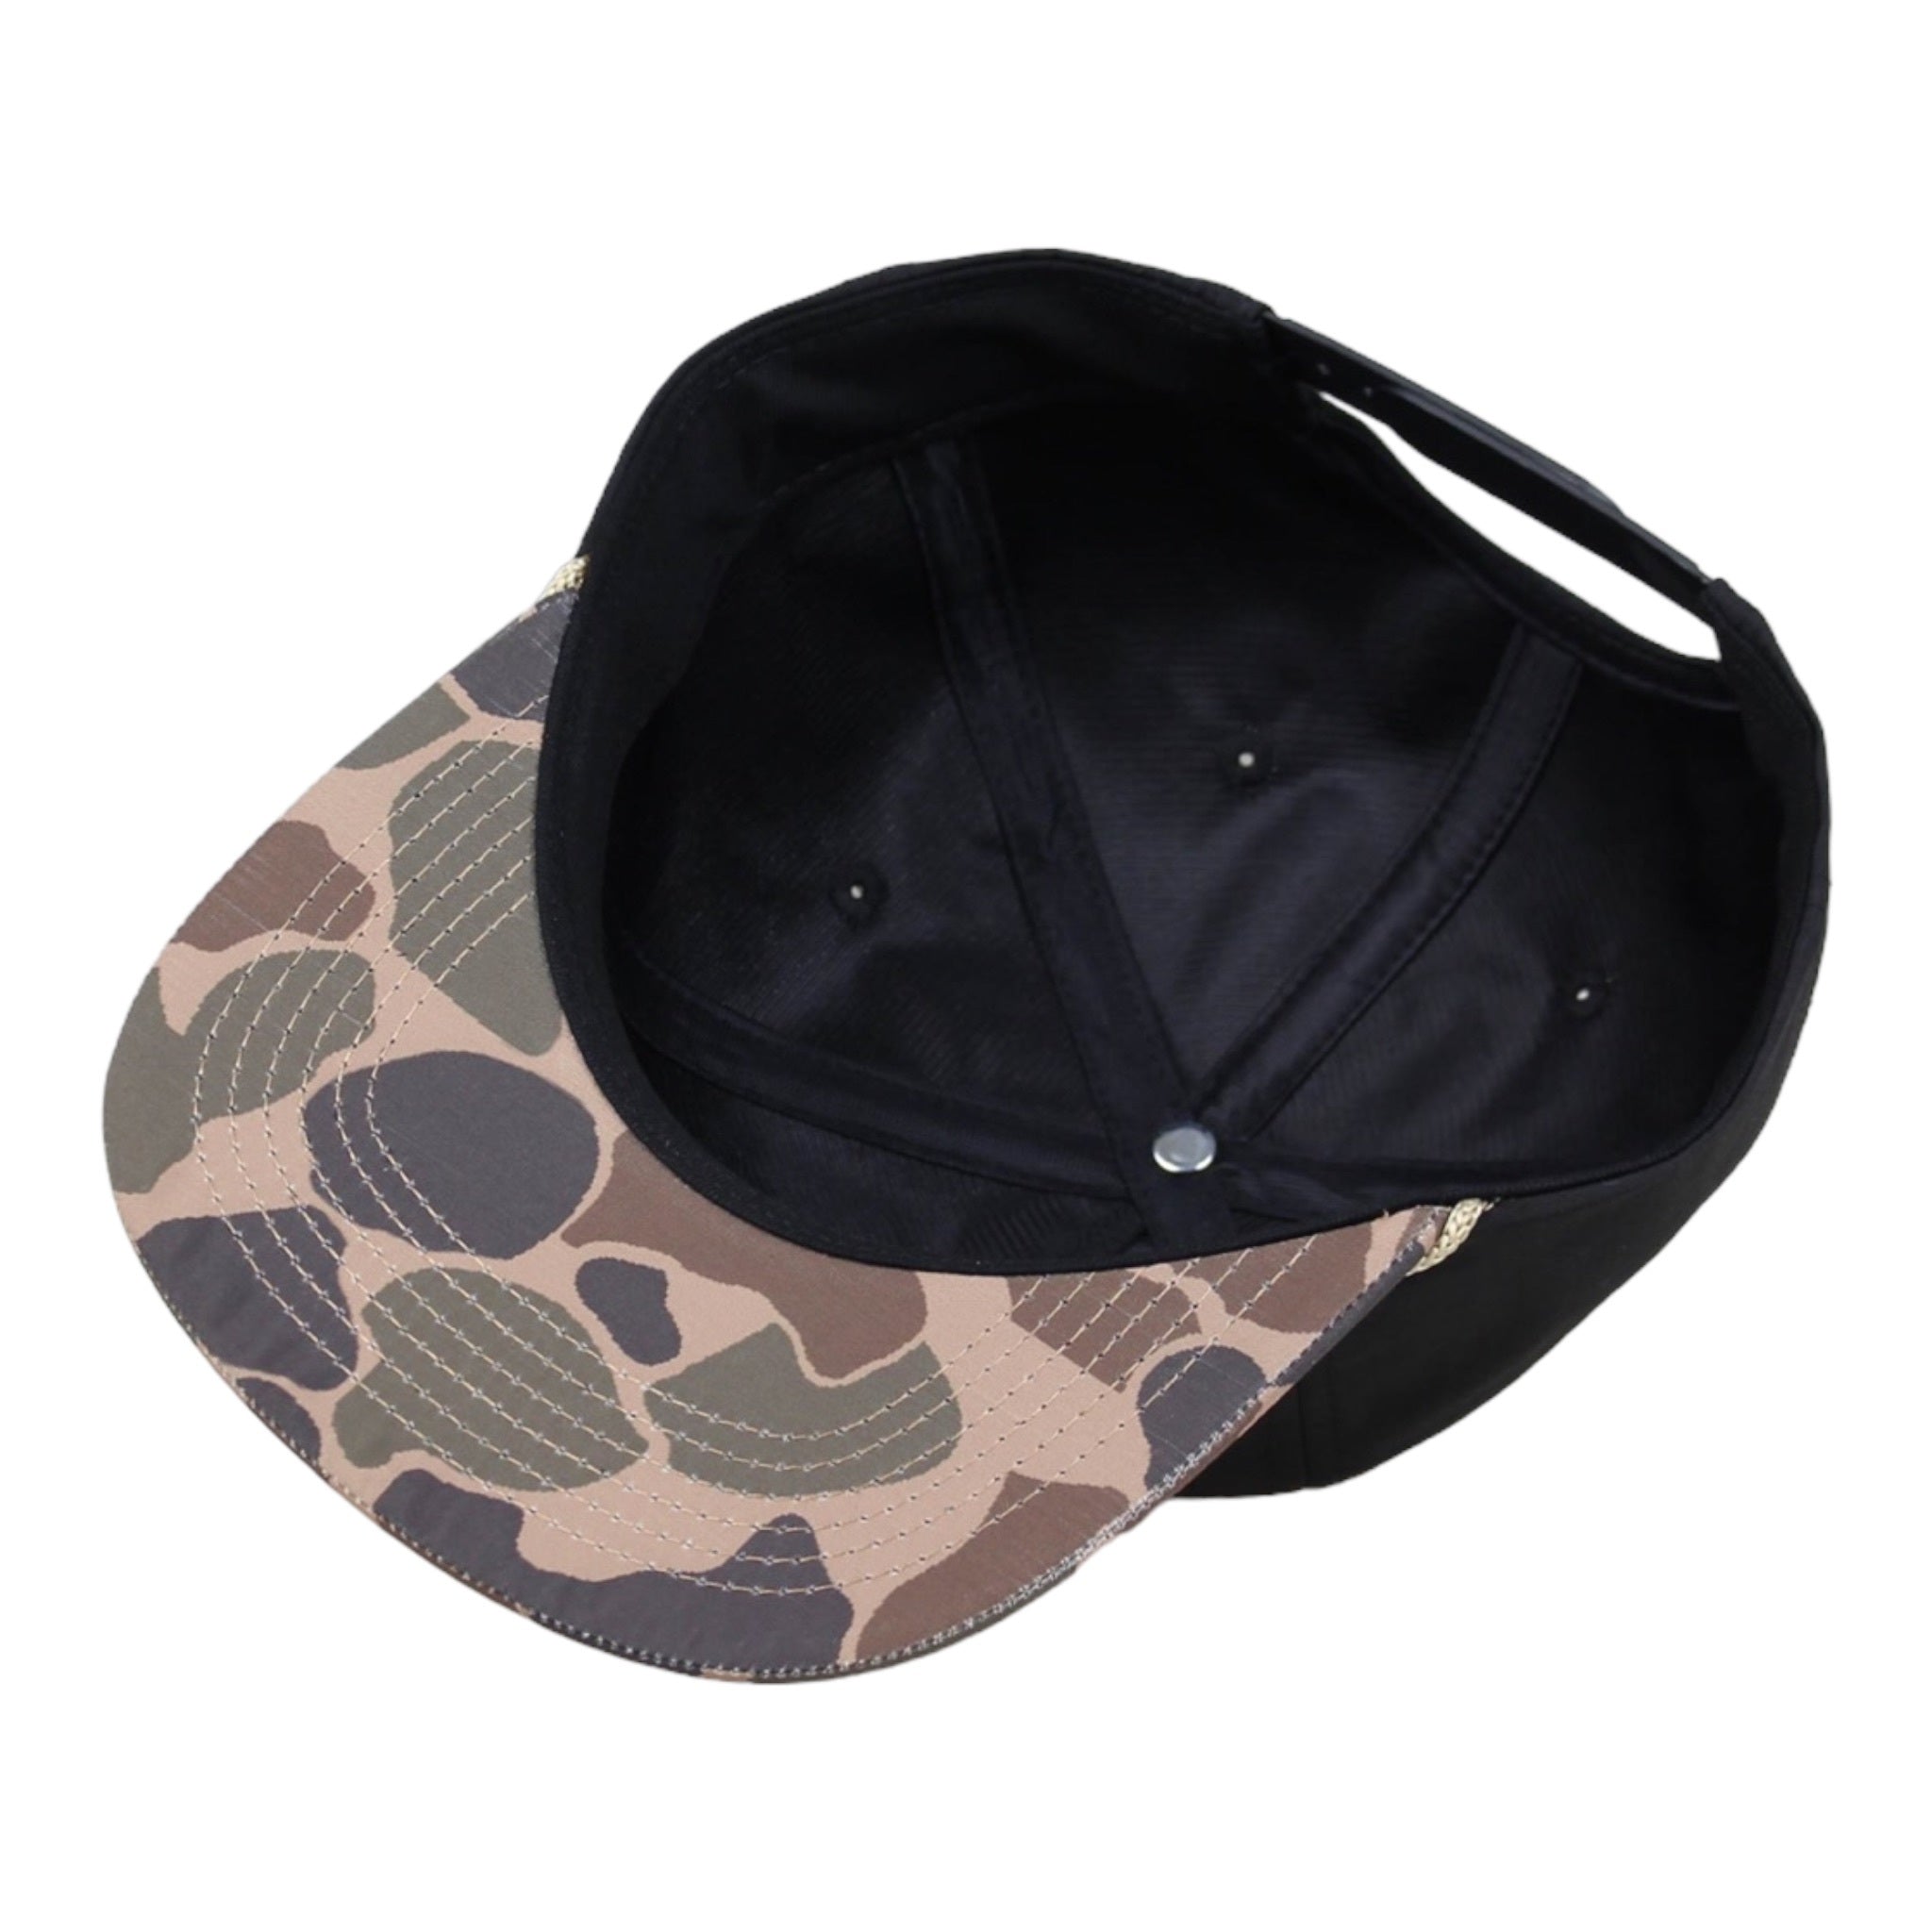 A Fowl Follower Black Camo Rope Hat with a black visor on top of it.